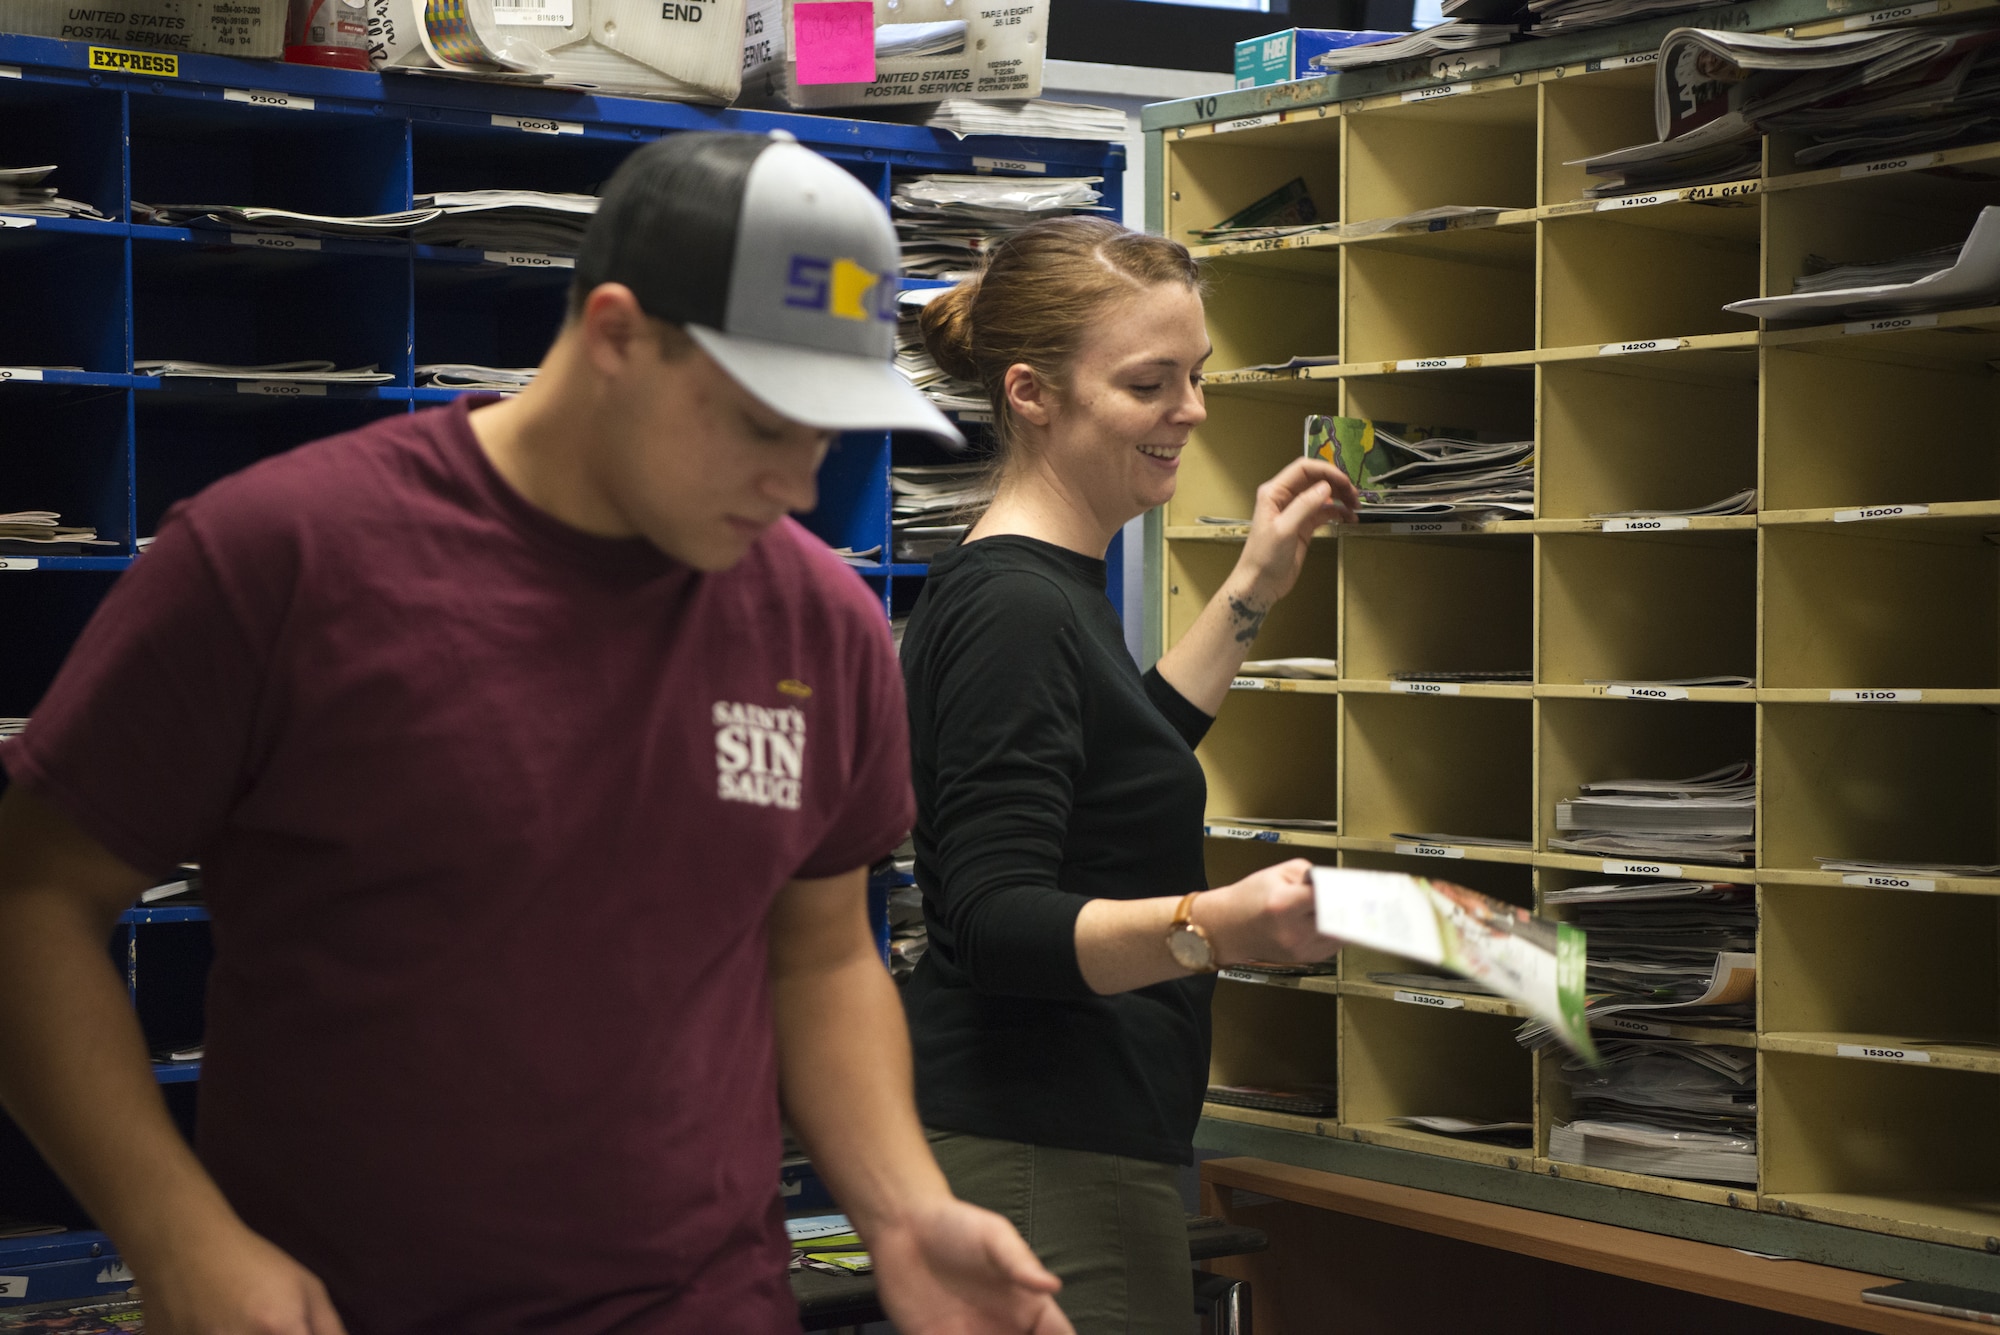 U.S. Air Force Airman 1st Class Taylor Greenwalt, left, and Staff Sgt. Emily Luzum, right, 450th Intelligence Squadron Airmen, sort mail at the North Side Post Office on Ramstein Air Base, Germany, Dec. 7, 2018. The 450th IS eased increased volume the holidays bring to the post offices on Ramstein Air Base. (U.S. Air Force Photo by Airman 1st Class Noah Coger)